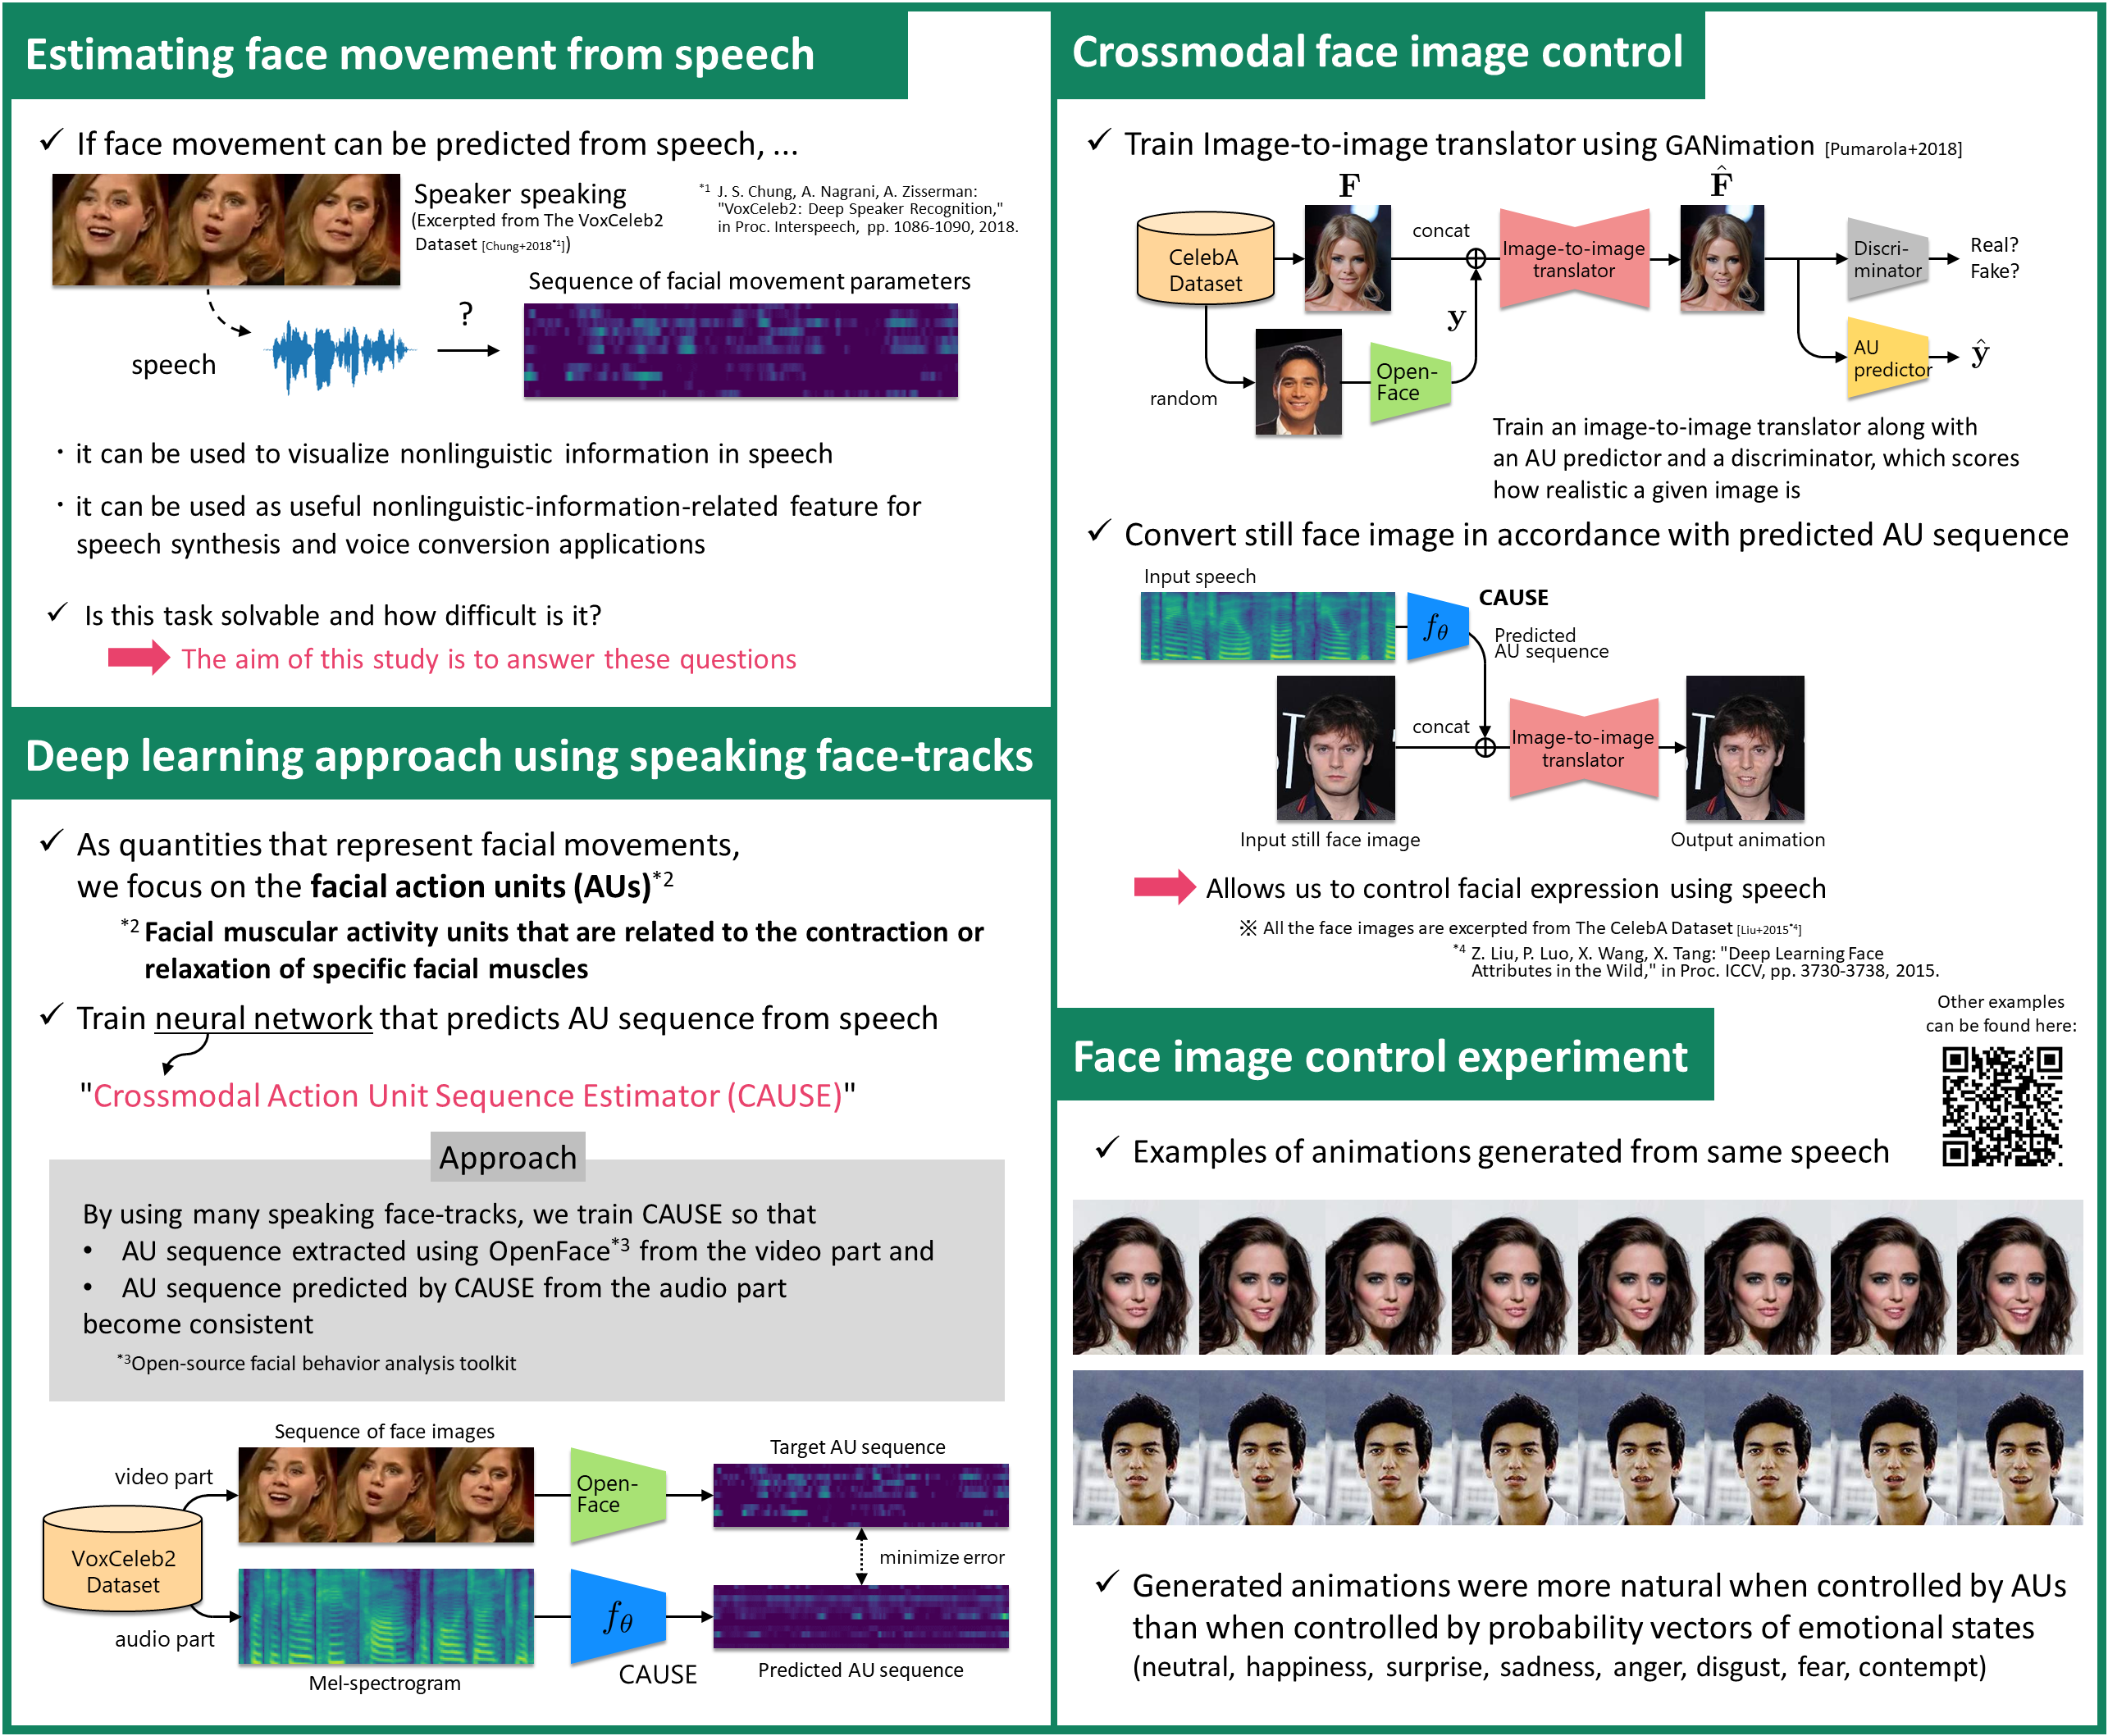 Controlling facial expressions in face image from speech